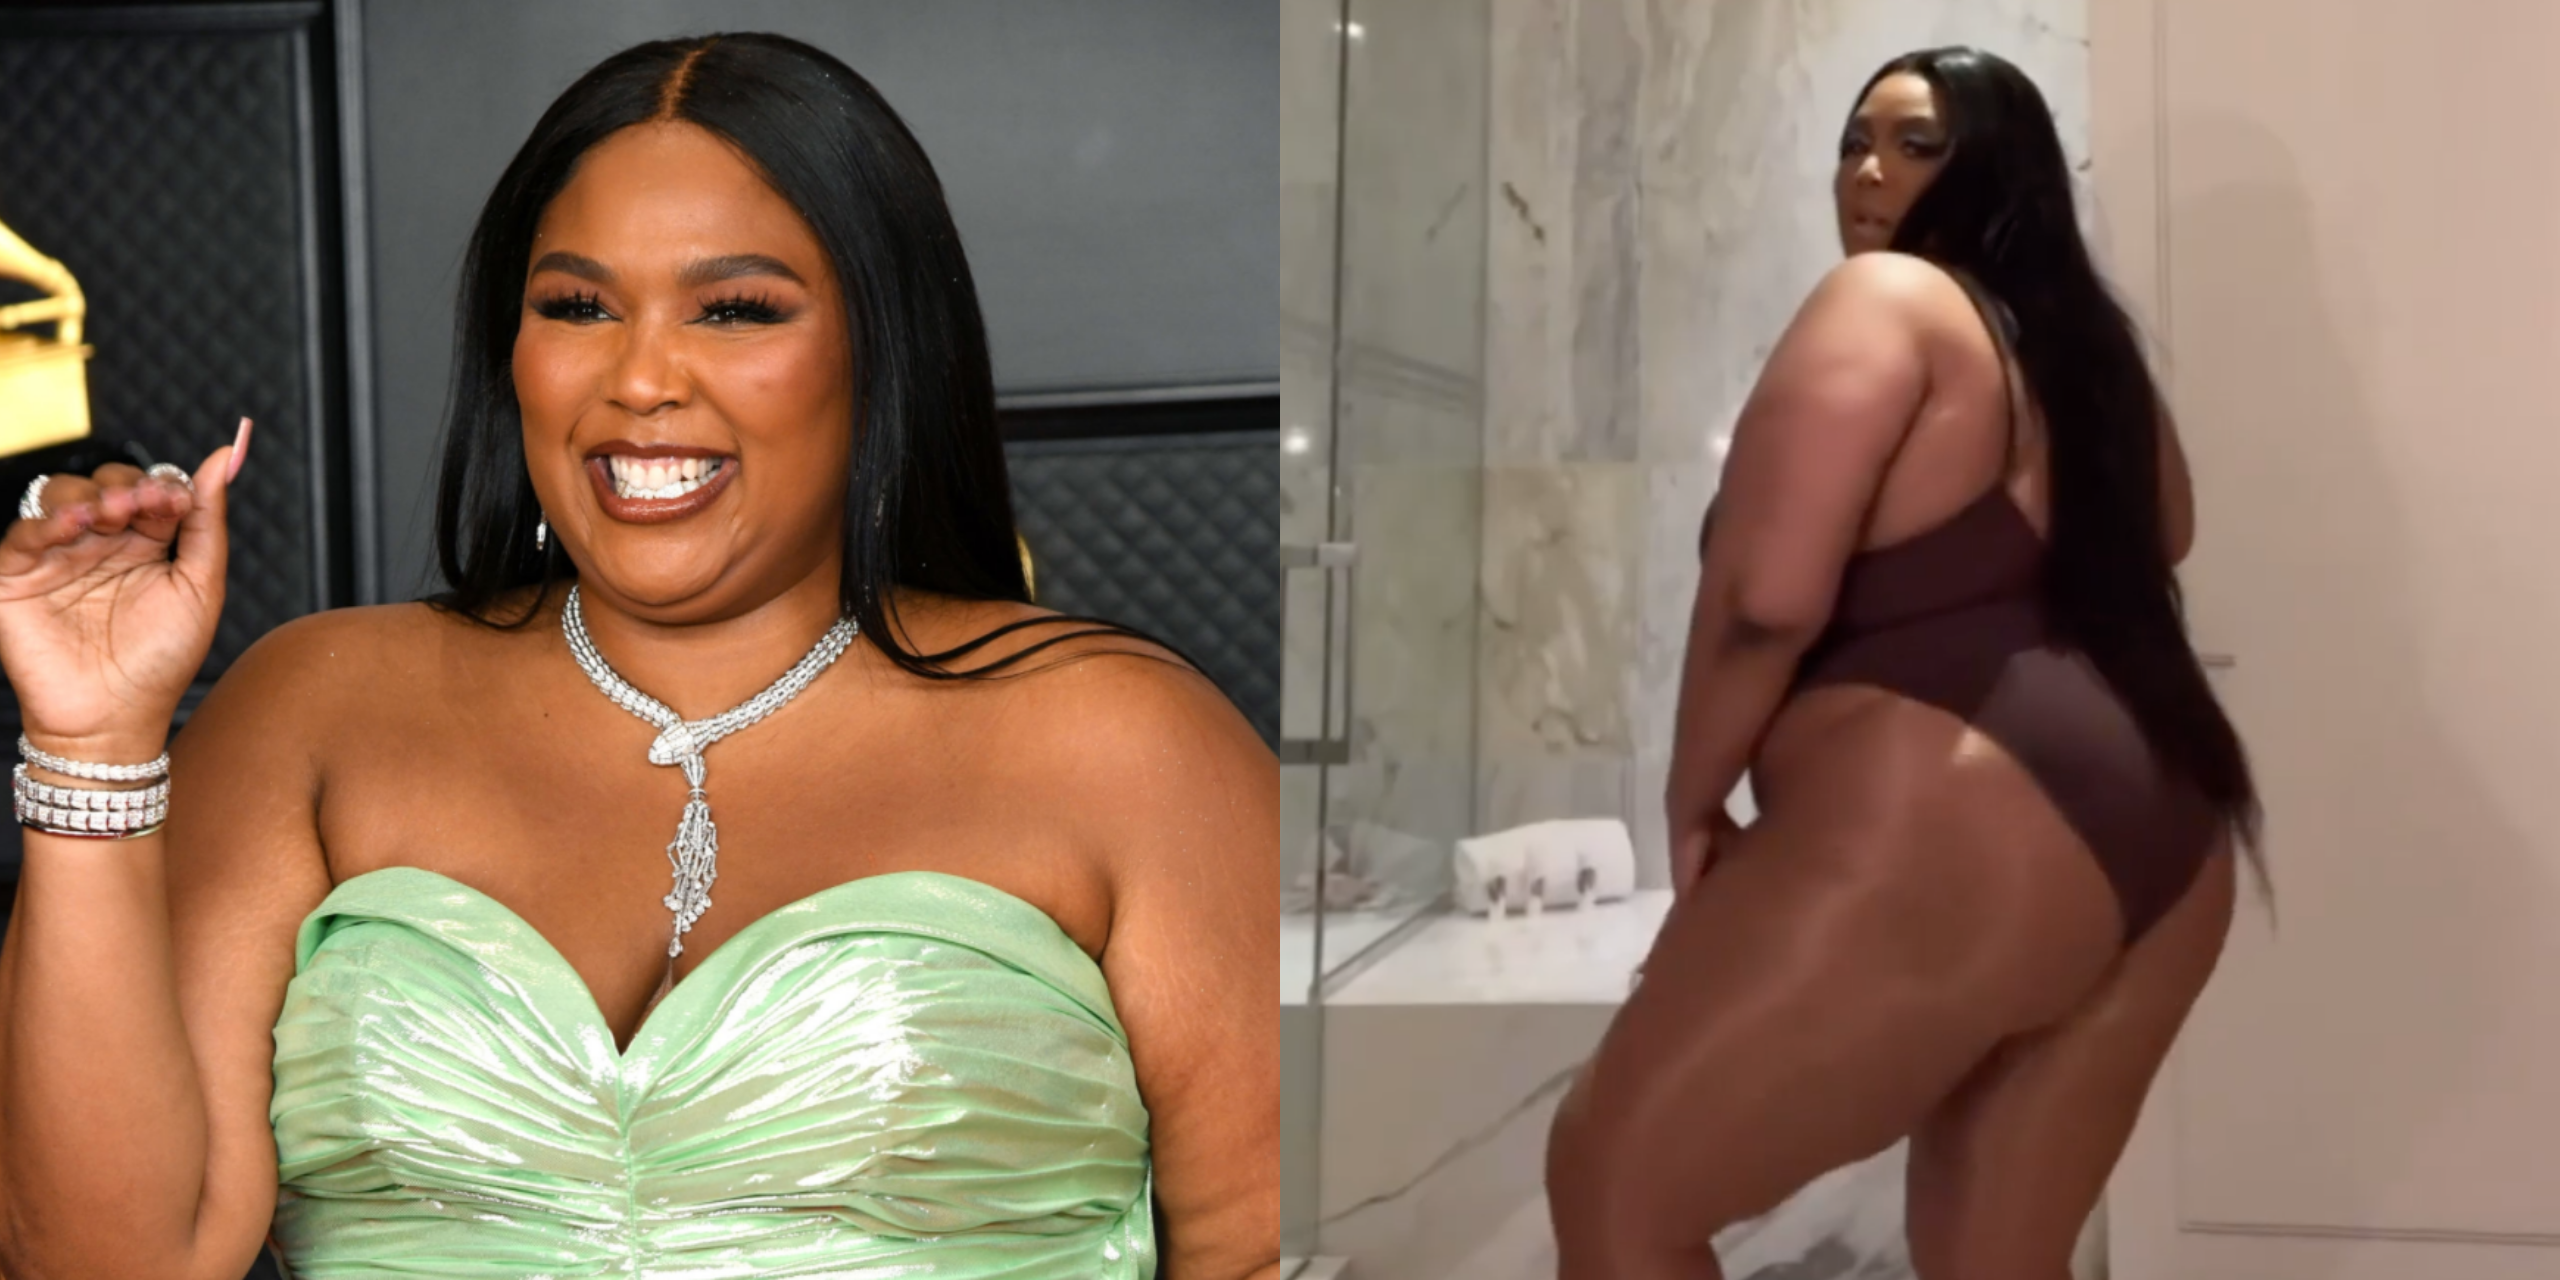 Lizzo Shares Body Positive Instagram Normalizing Weight Gain pic pic